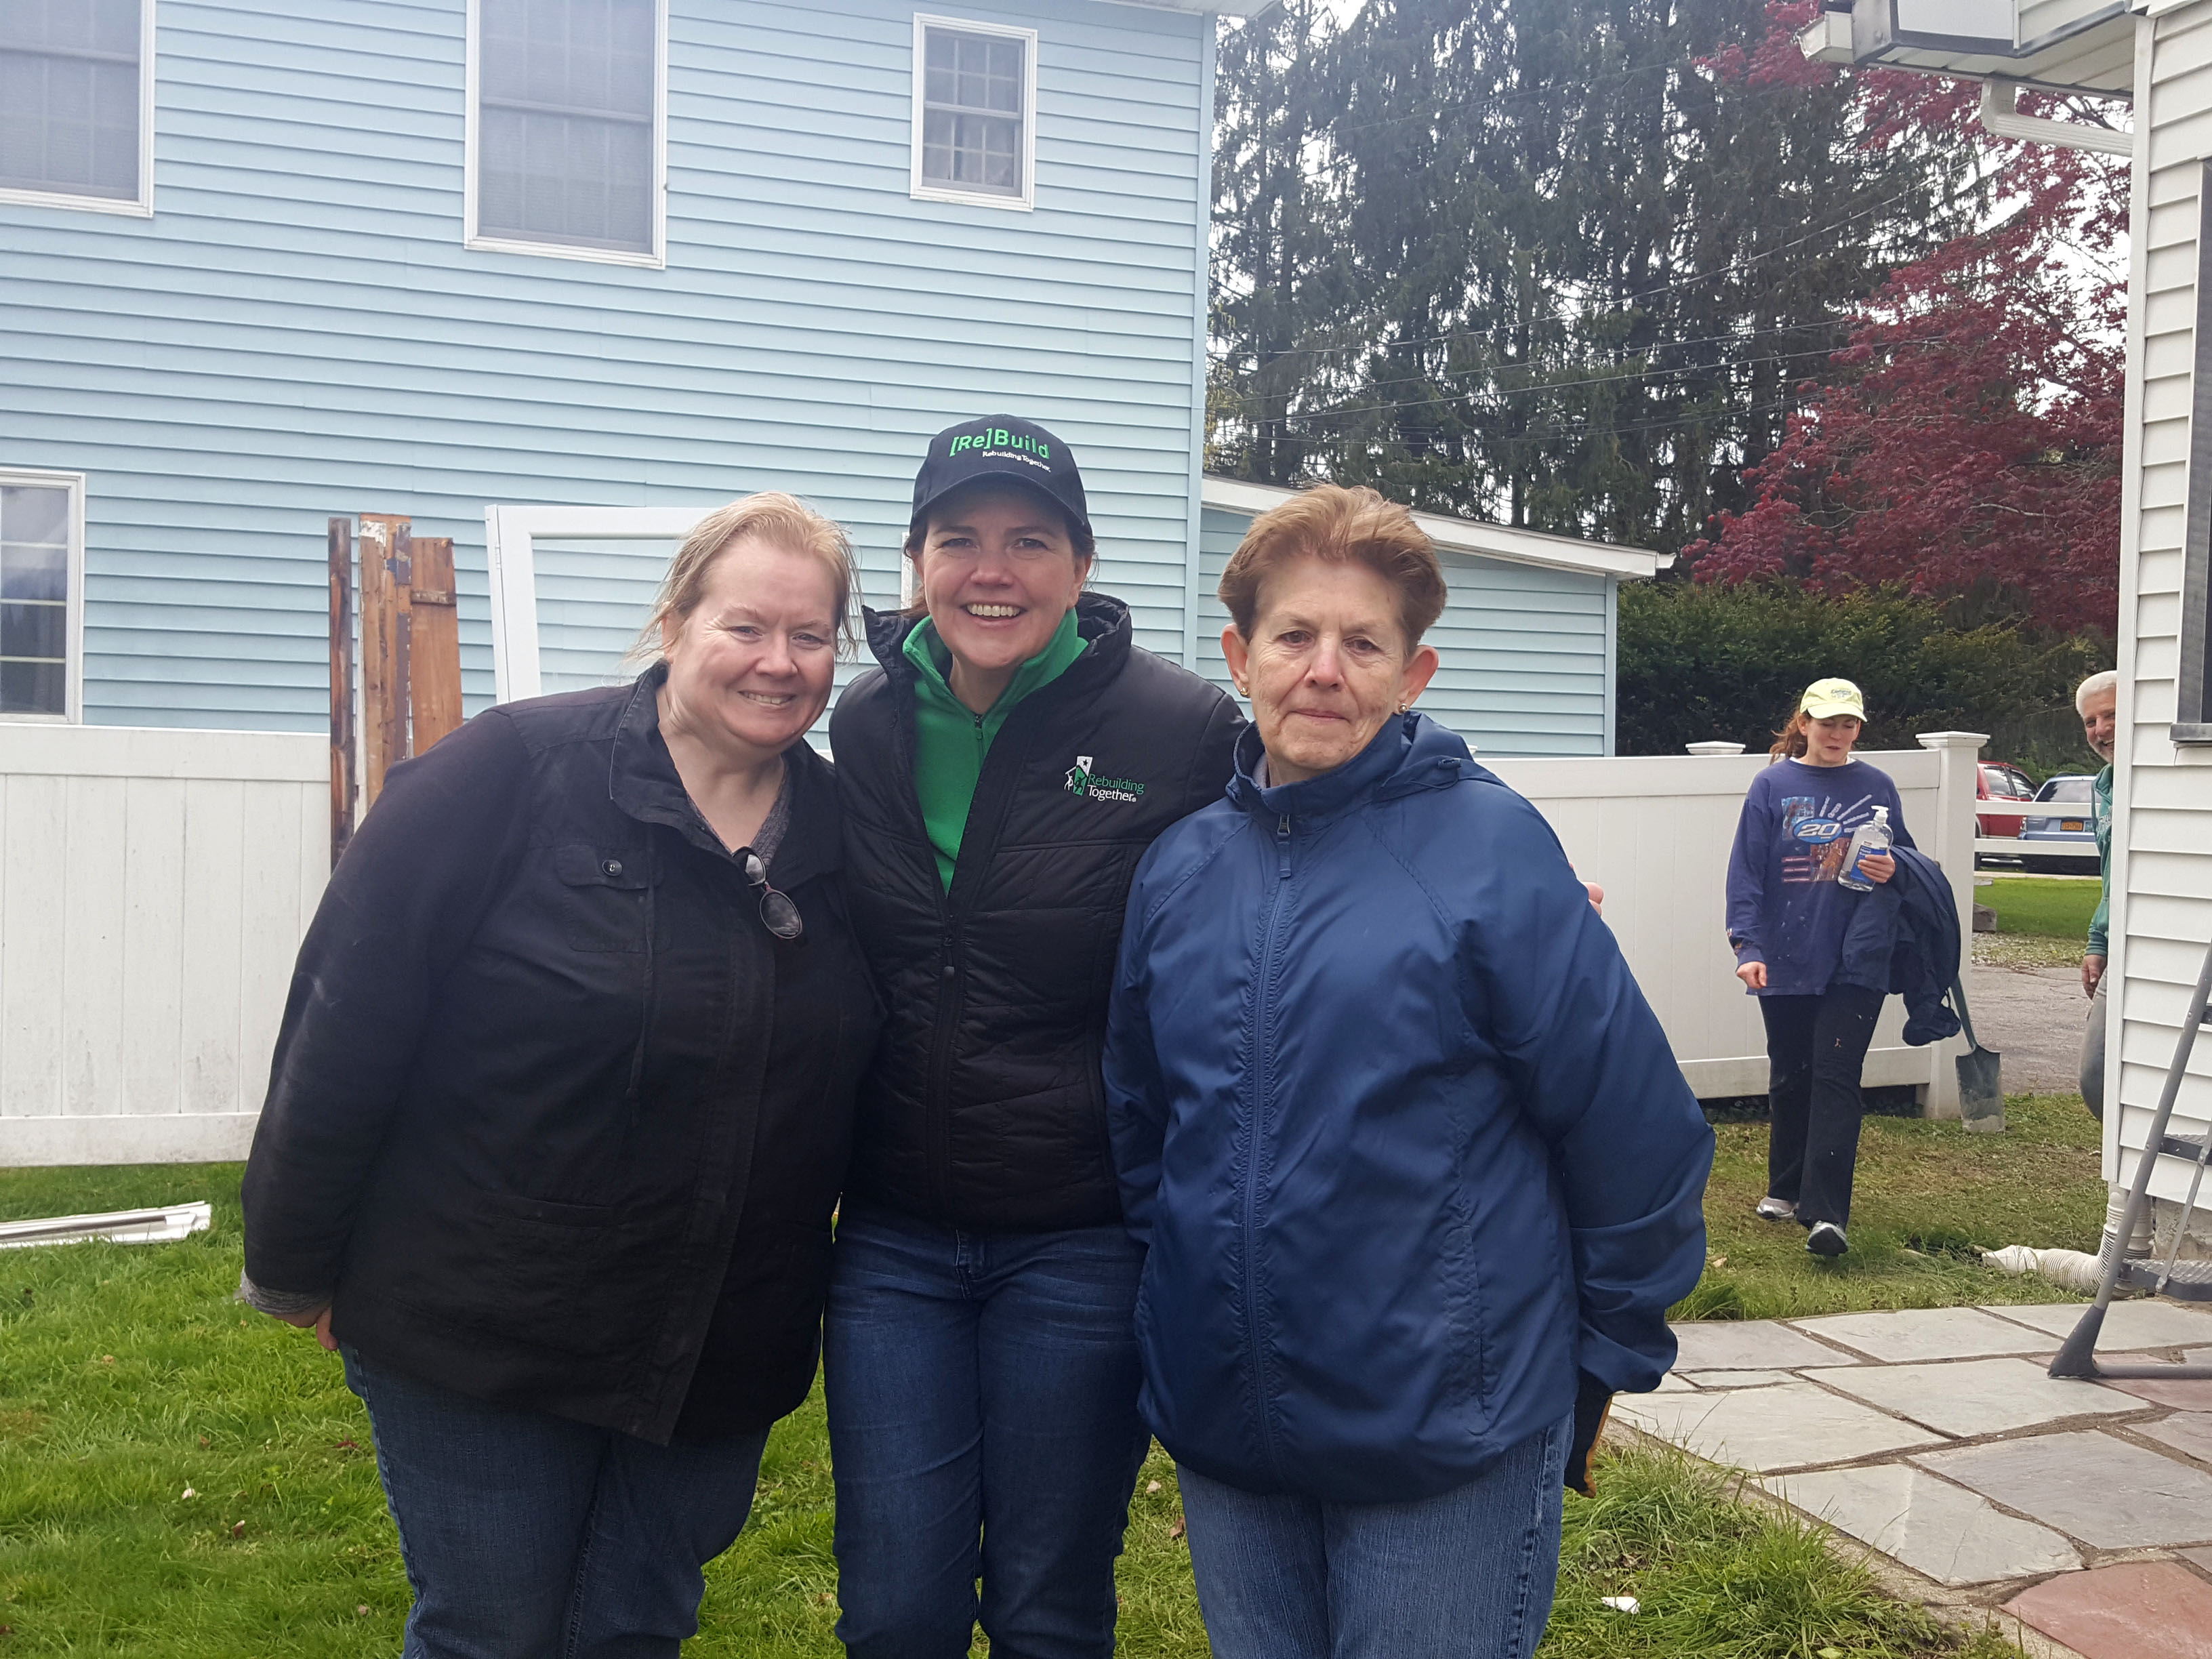 Homeowners AnnMarie and Lee Baker with Christina Boryk, Executive Director of RTDC